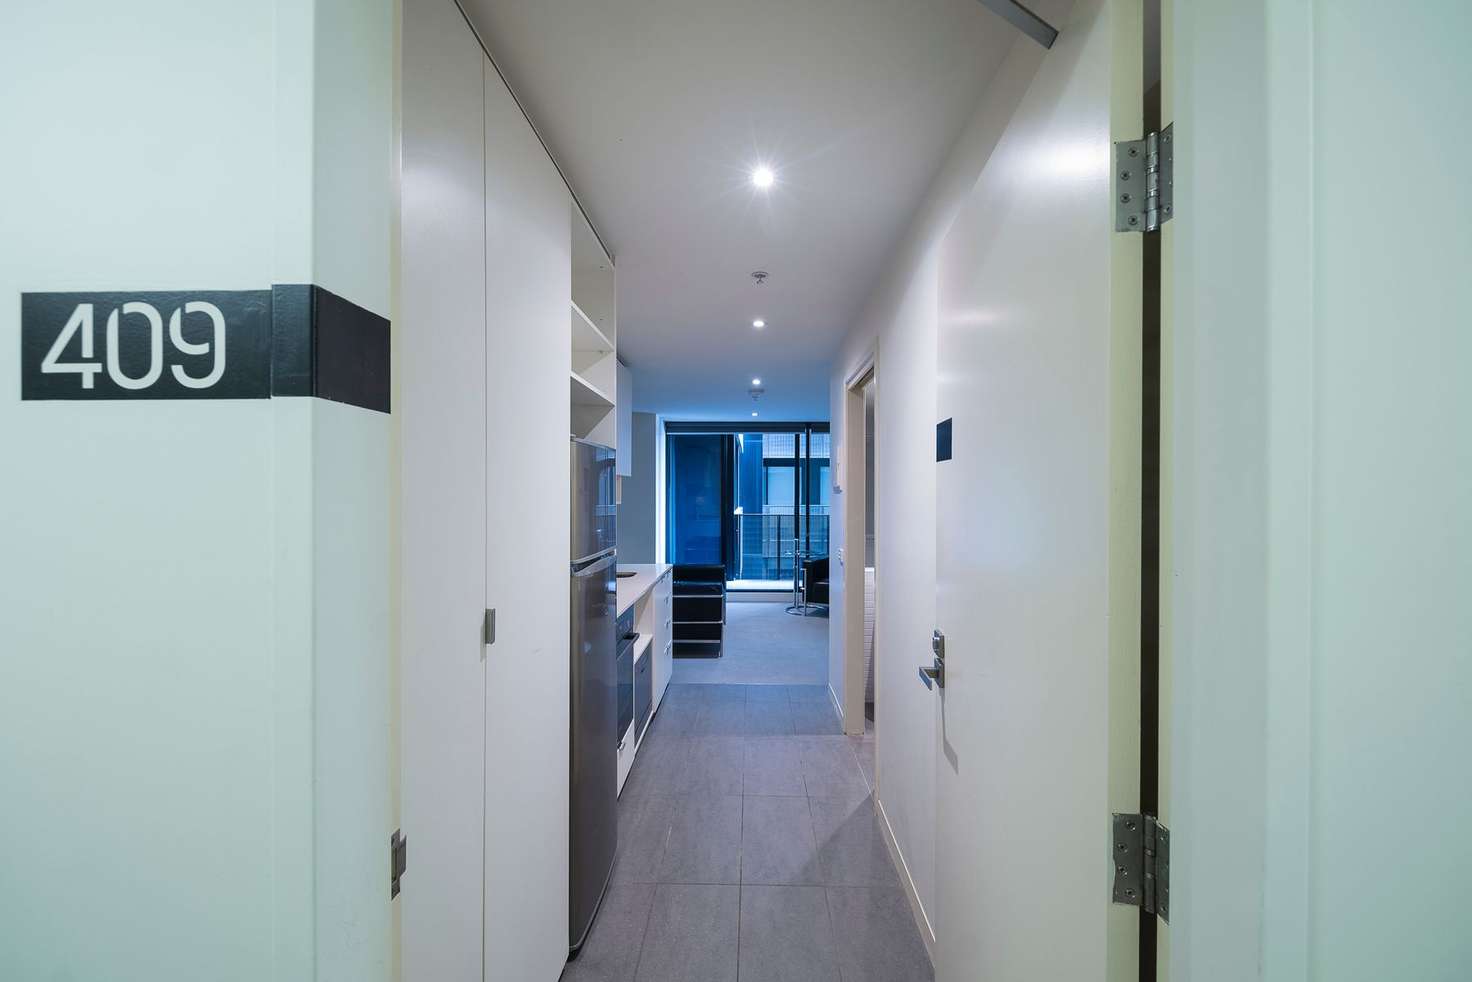 Main view of Homely apartment listing, 409/253 Franklin Street, Melbourne VIC 3000